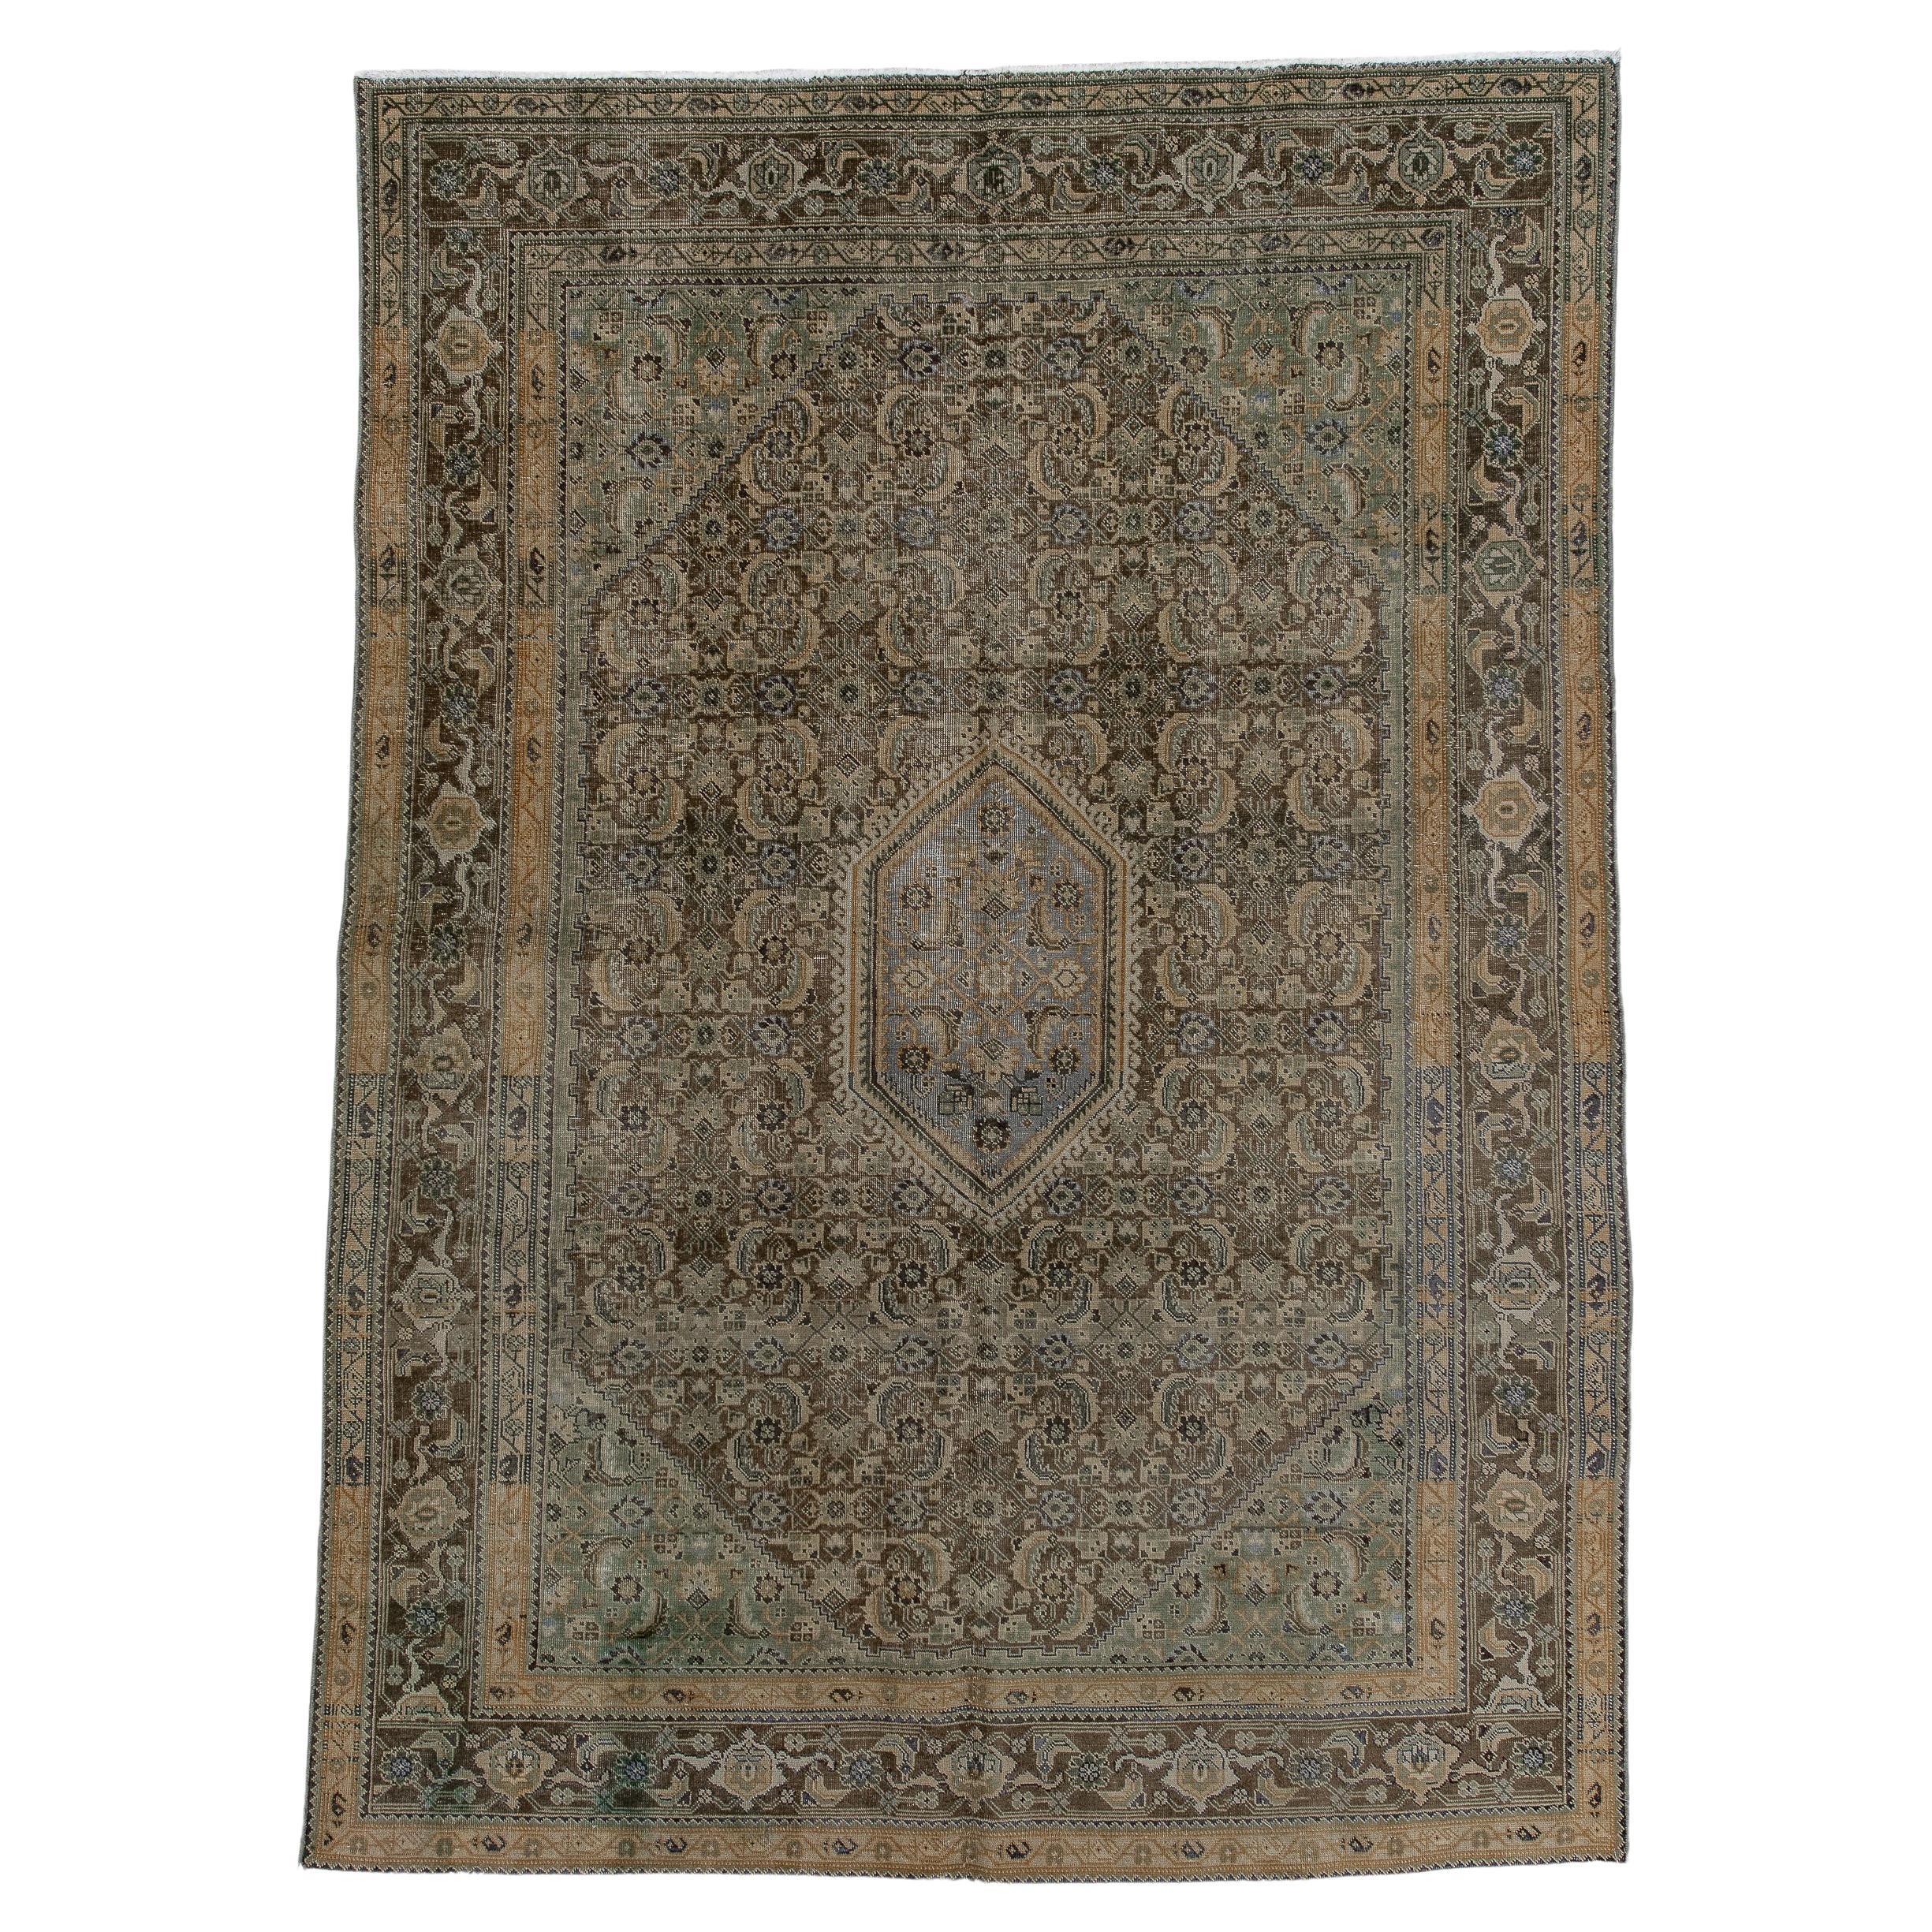 Antique Tabriz `Earth Green Tones and Tan Shades - Grand Central Medallion For Sale